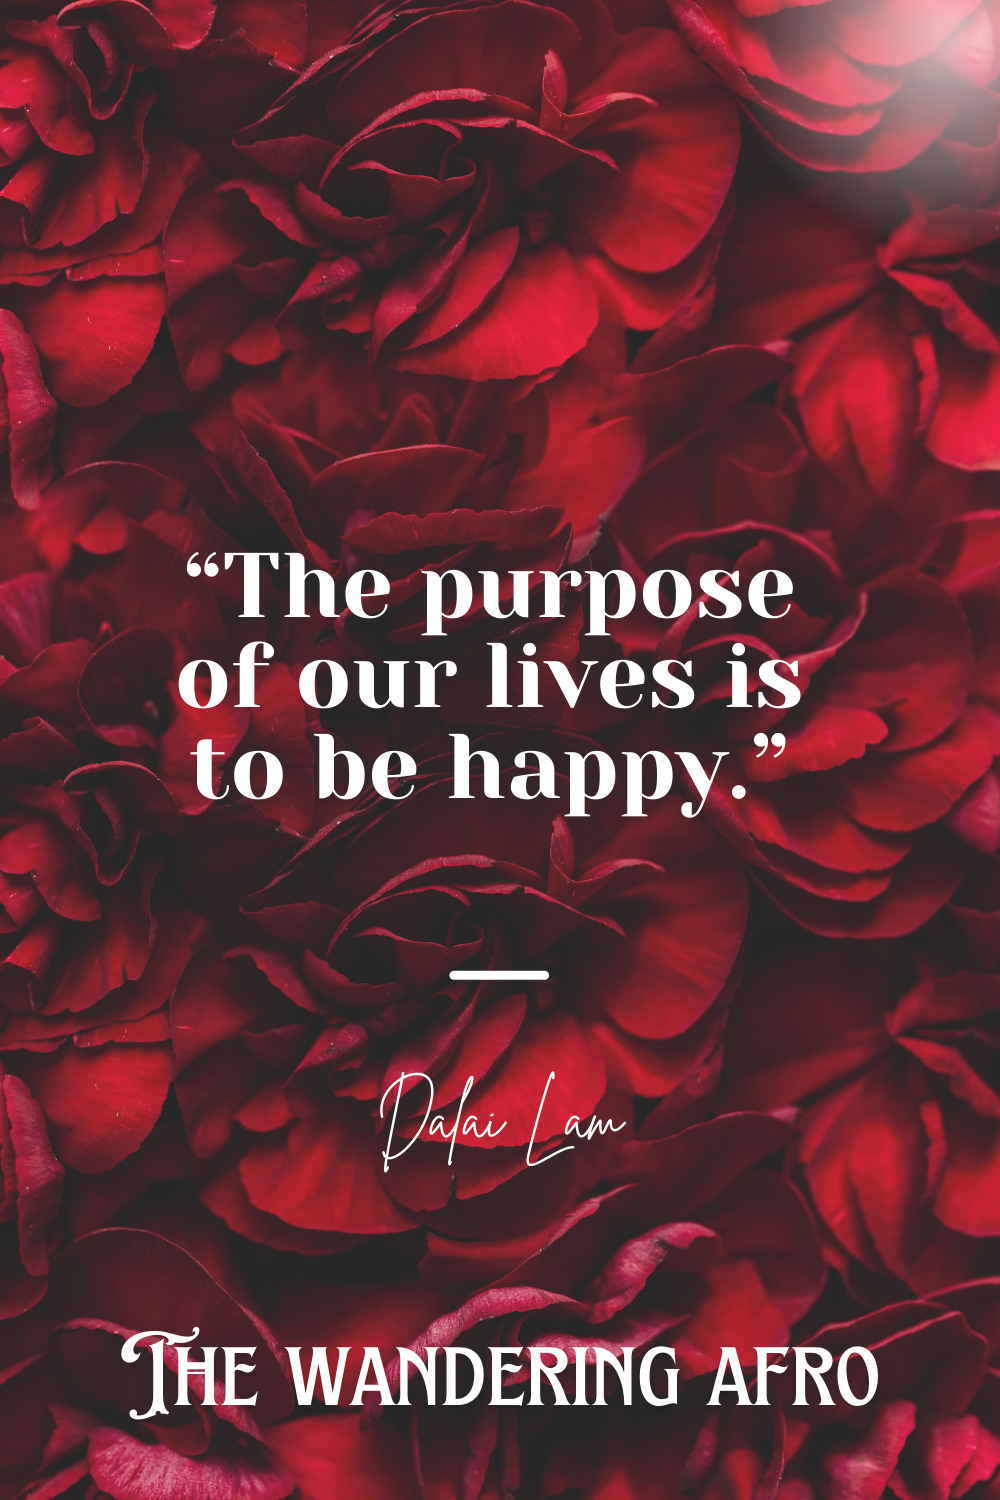 Red roses in background with text that reads, " The purpose of our lives is to be happy. by Dalai Lam